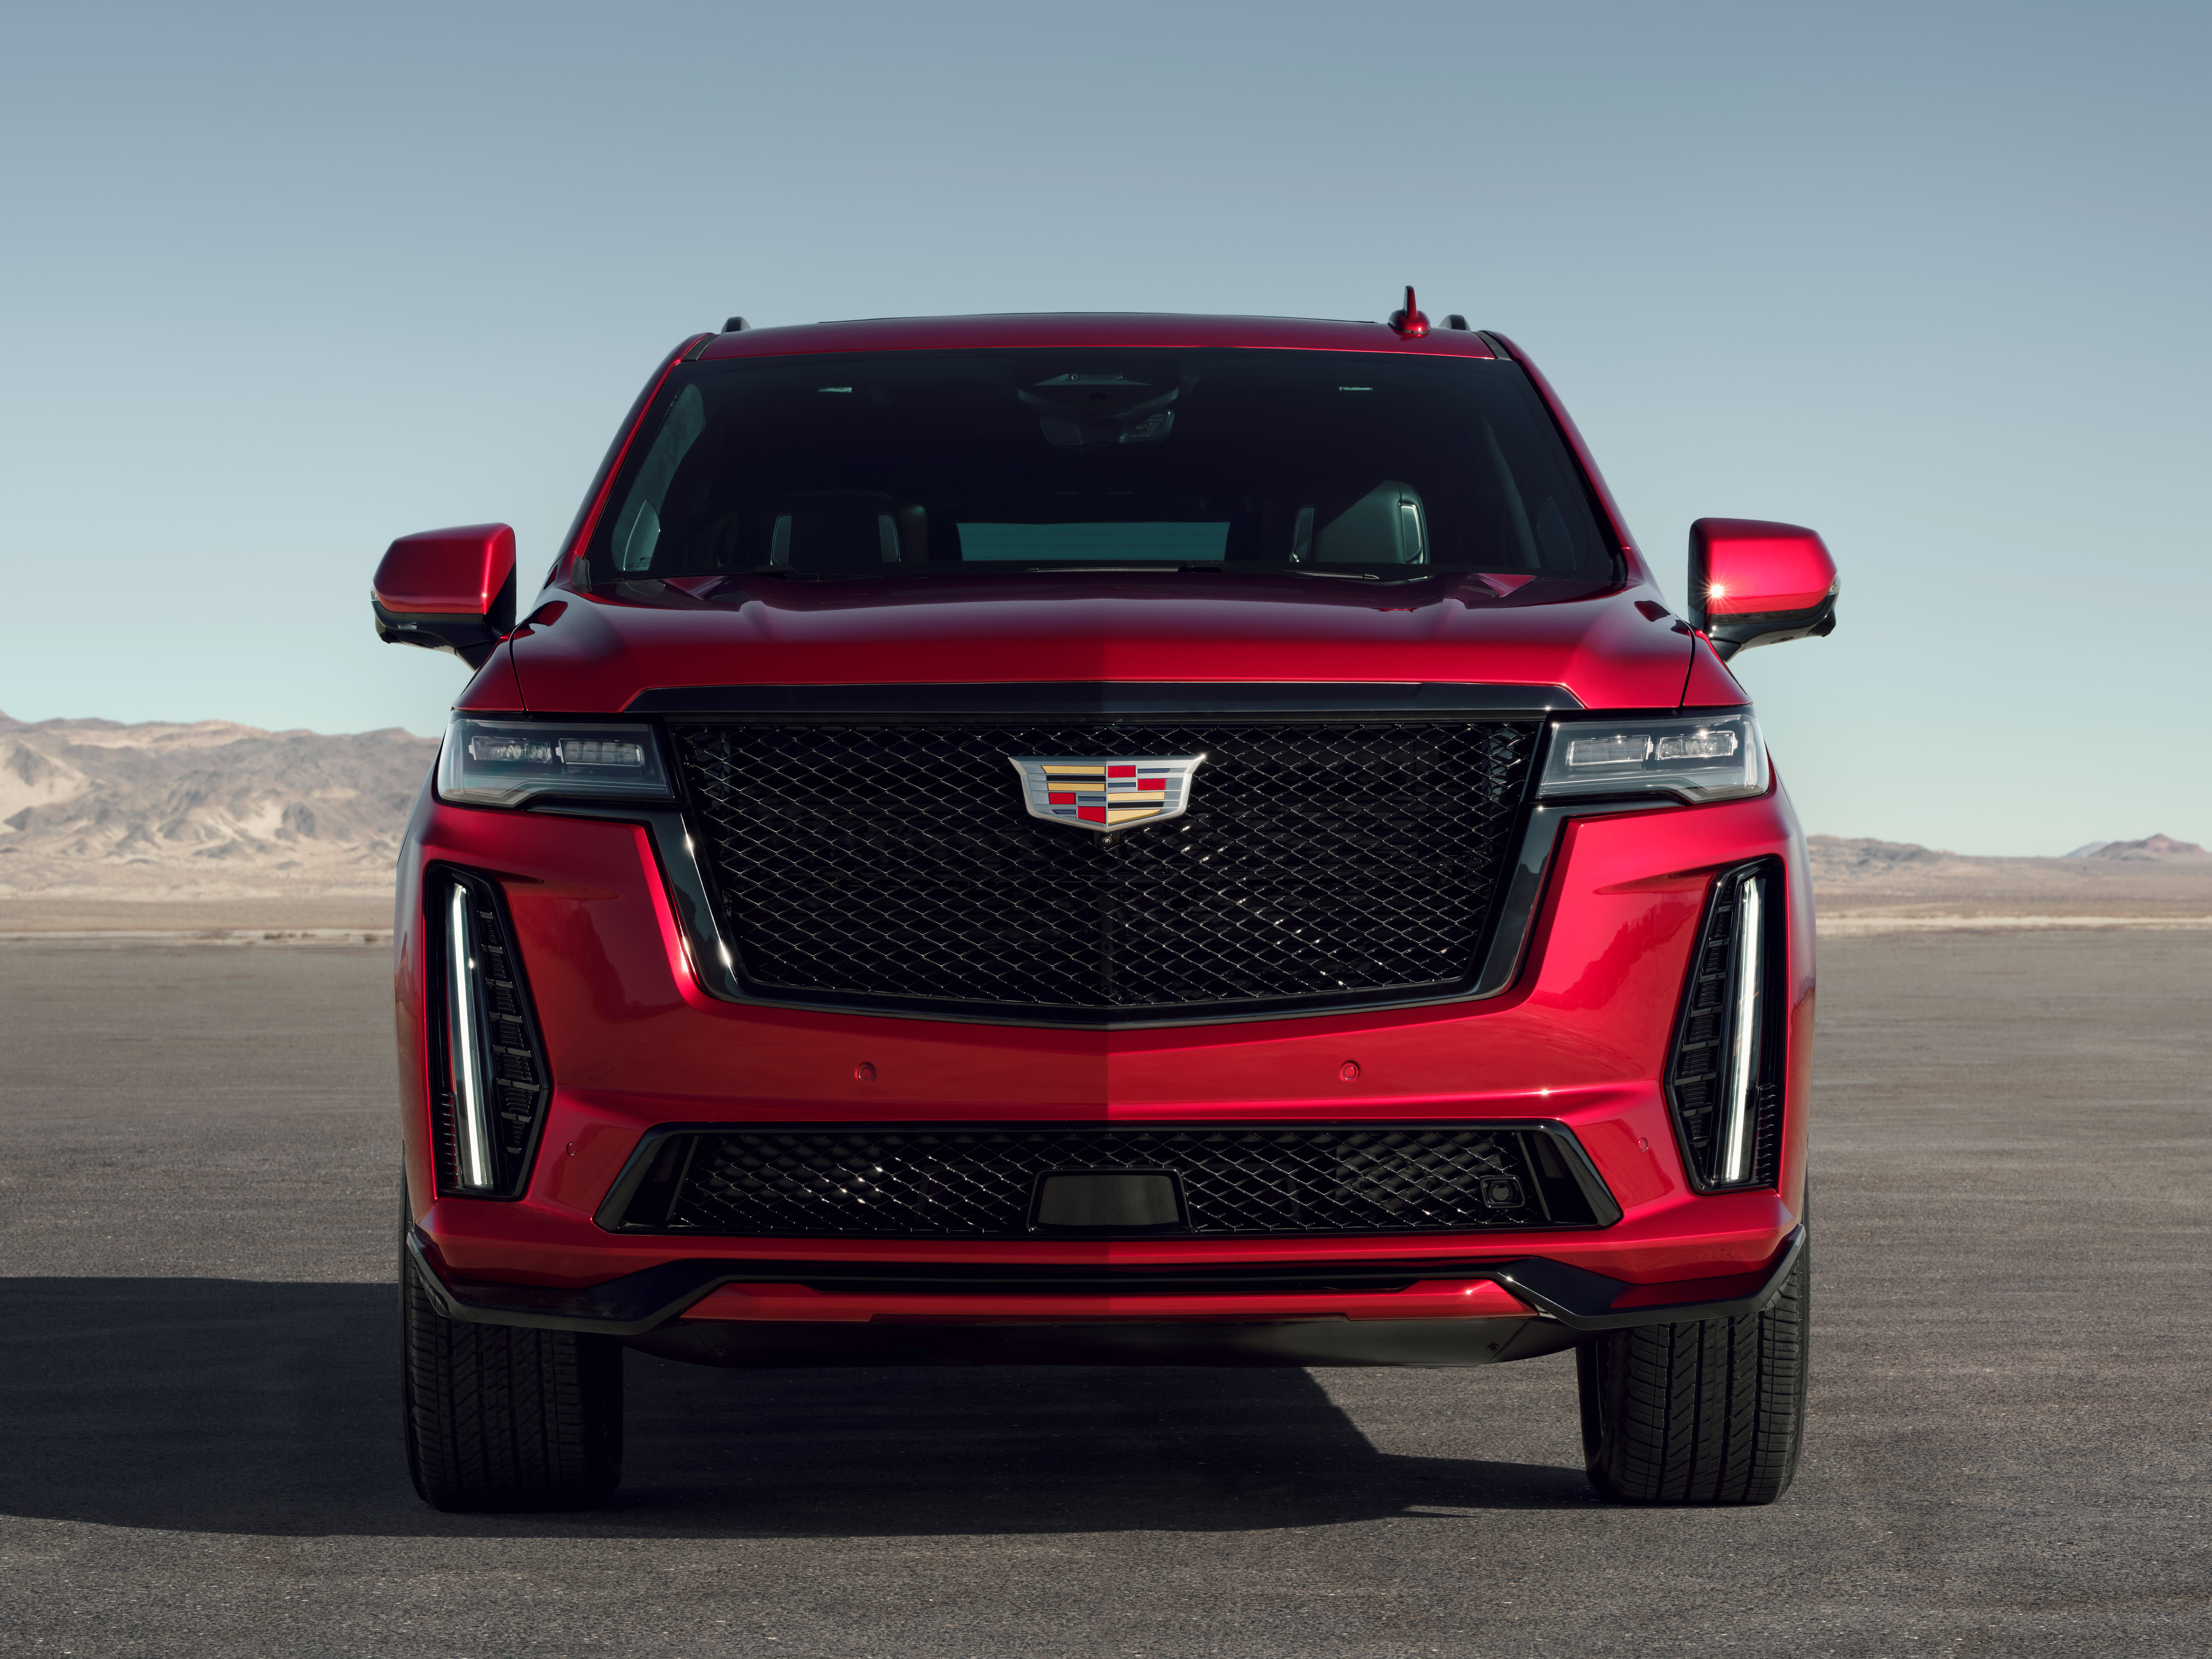 Electric Cadillac Escalade 'IQ' coming from GM later this year